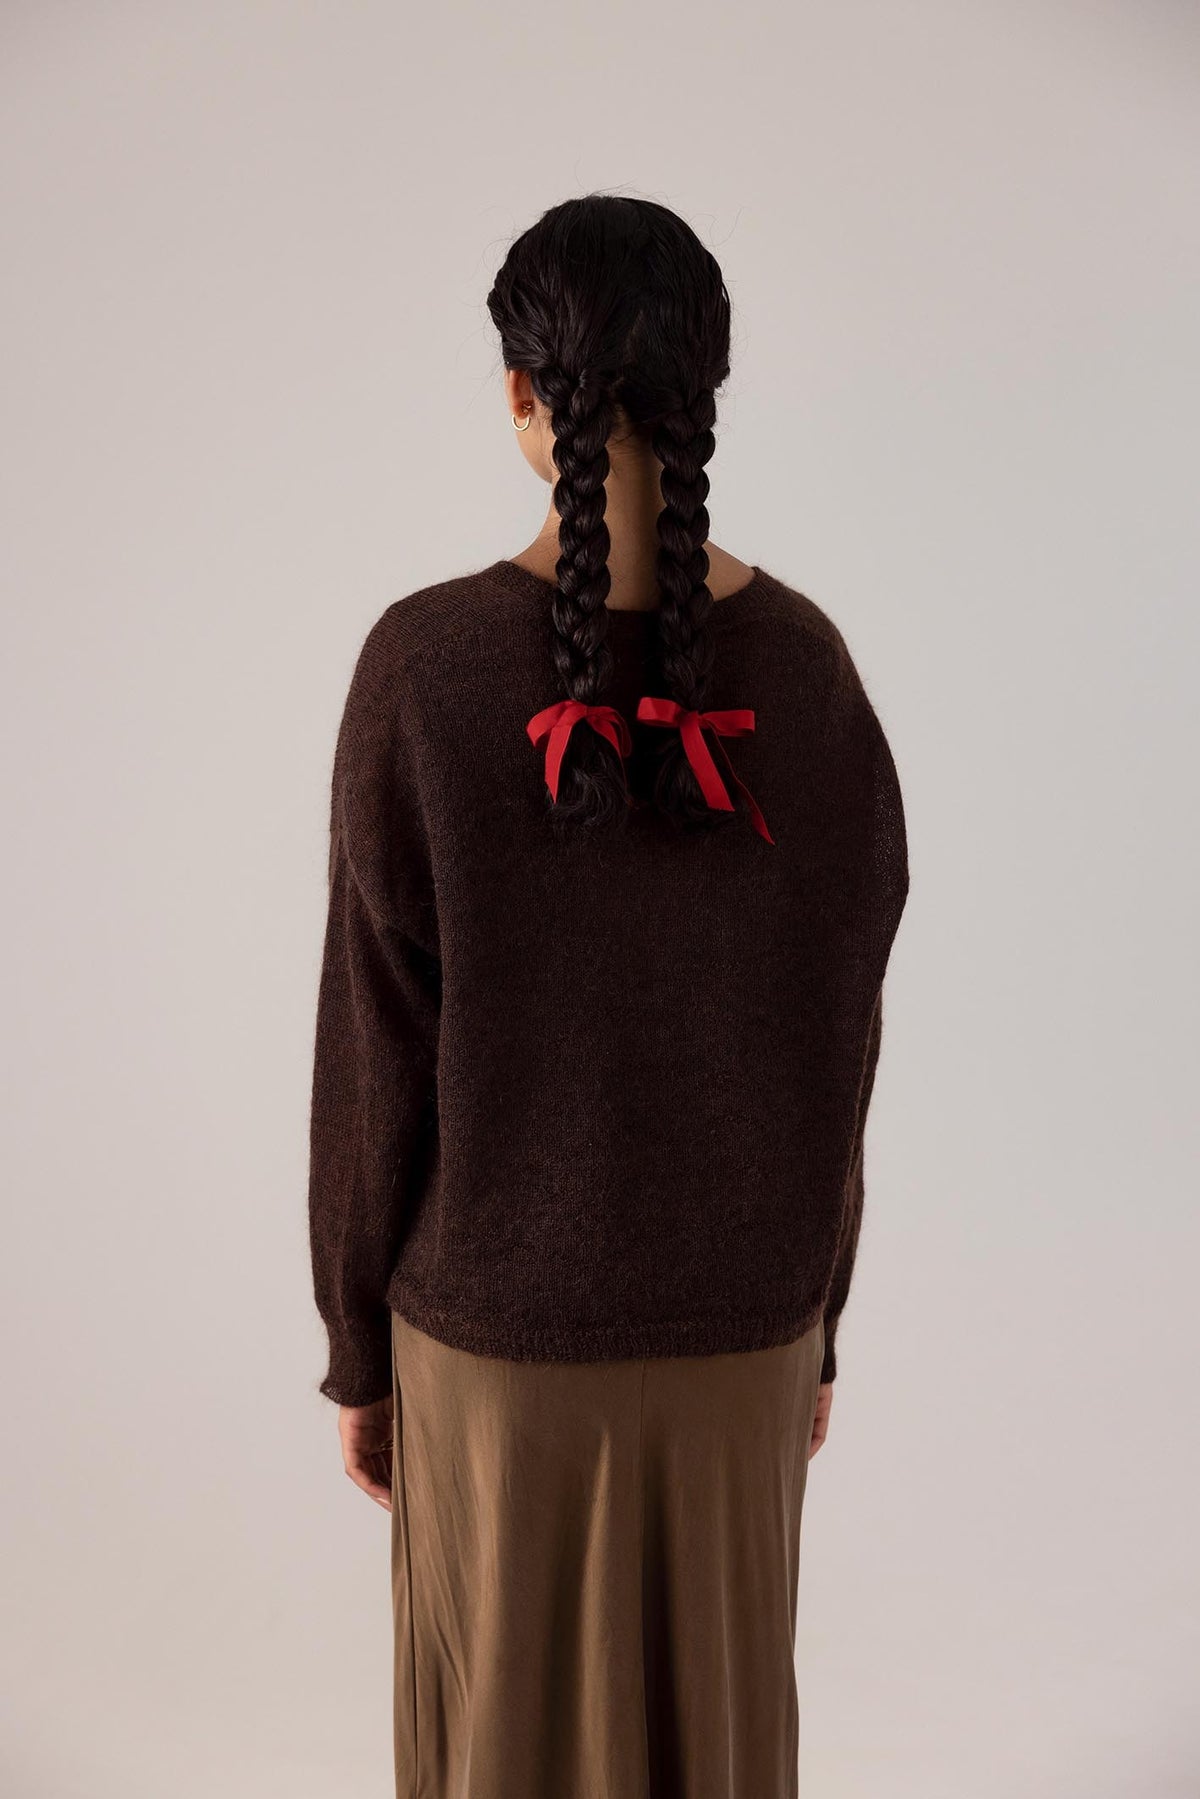 The back view of a woman wearing a Francie Feather Knit – Cocoa sweater with a red bow.